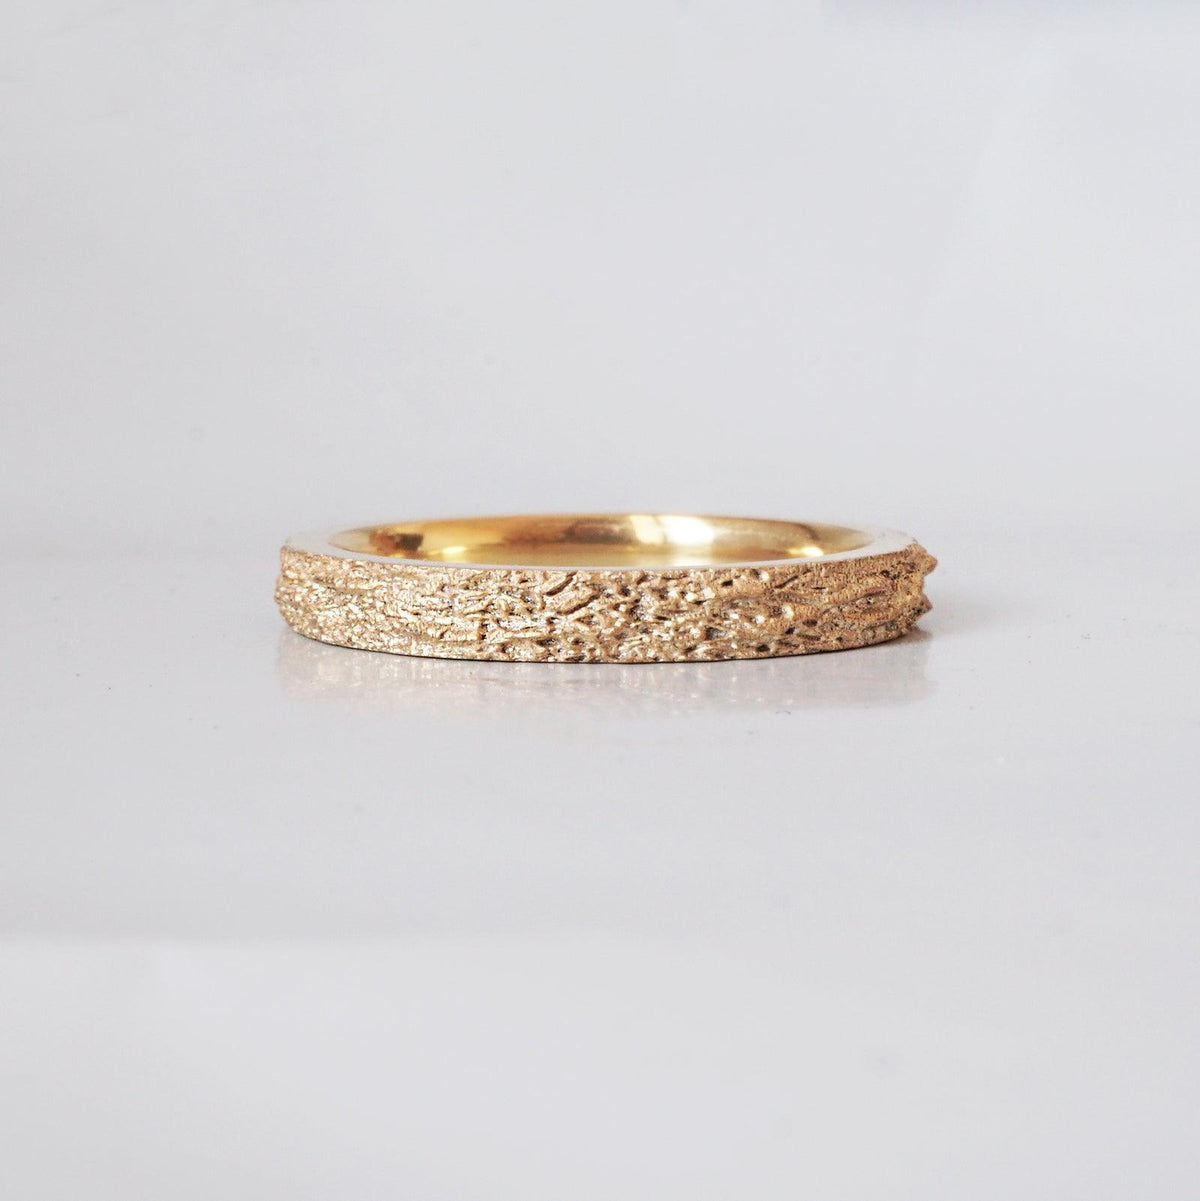 Meteoroid Ring Band in Sterling Silver, 14K and 18K Gold, 3mm - Tippy Taste Jewelry